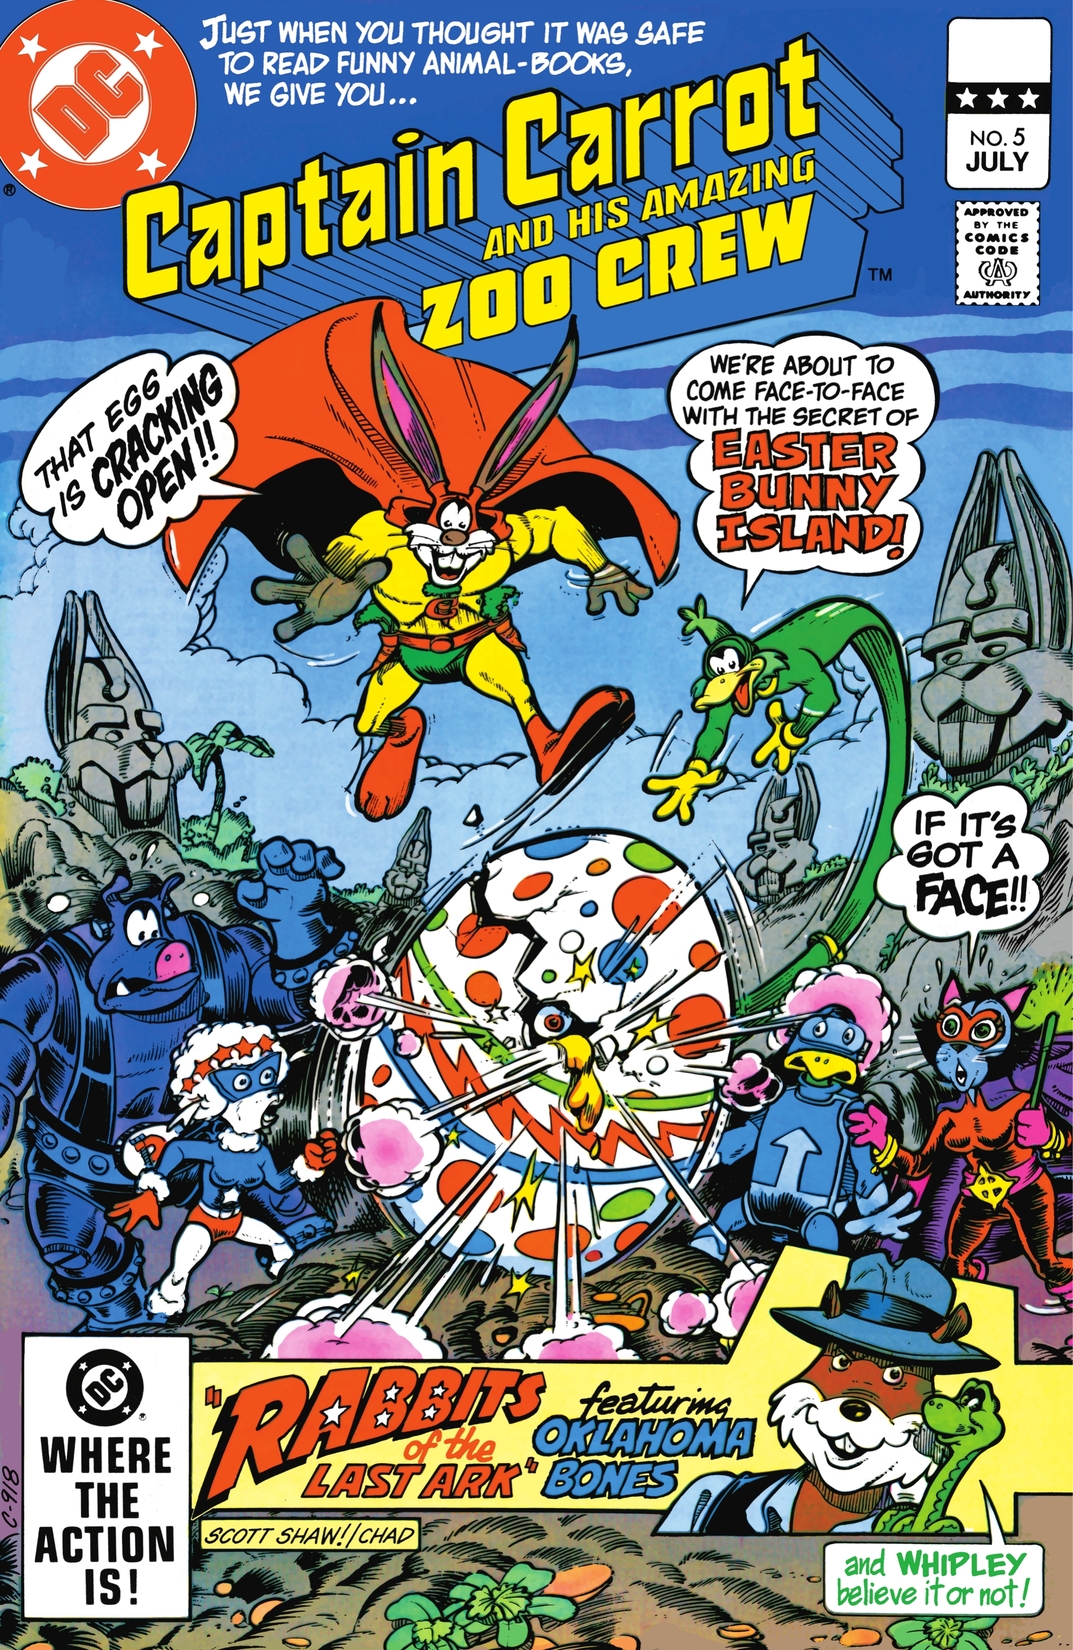 Captain Carrot and His Amazing Zoo Crew #5 preview images